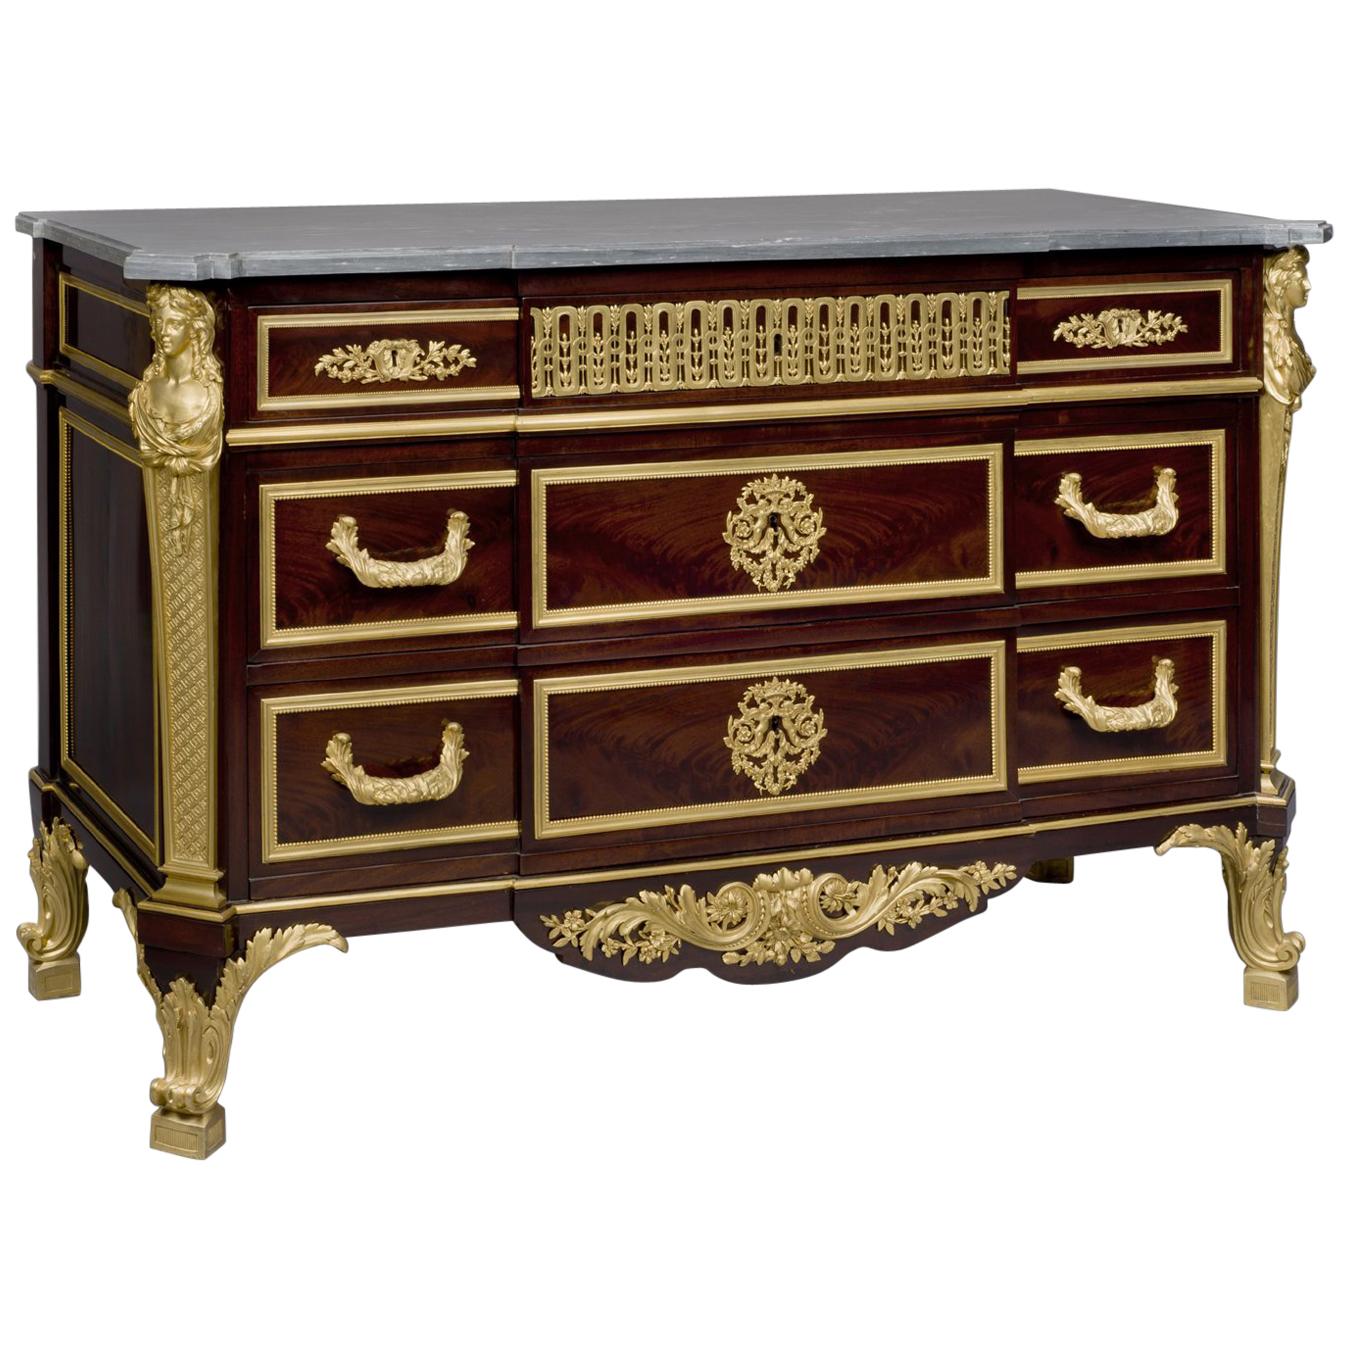 Louis XVI Style Commode after the Model by Jean-Henri Riesener, circa 1880 For Sale